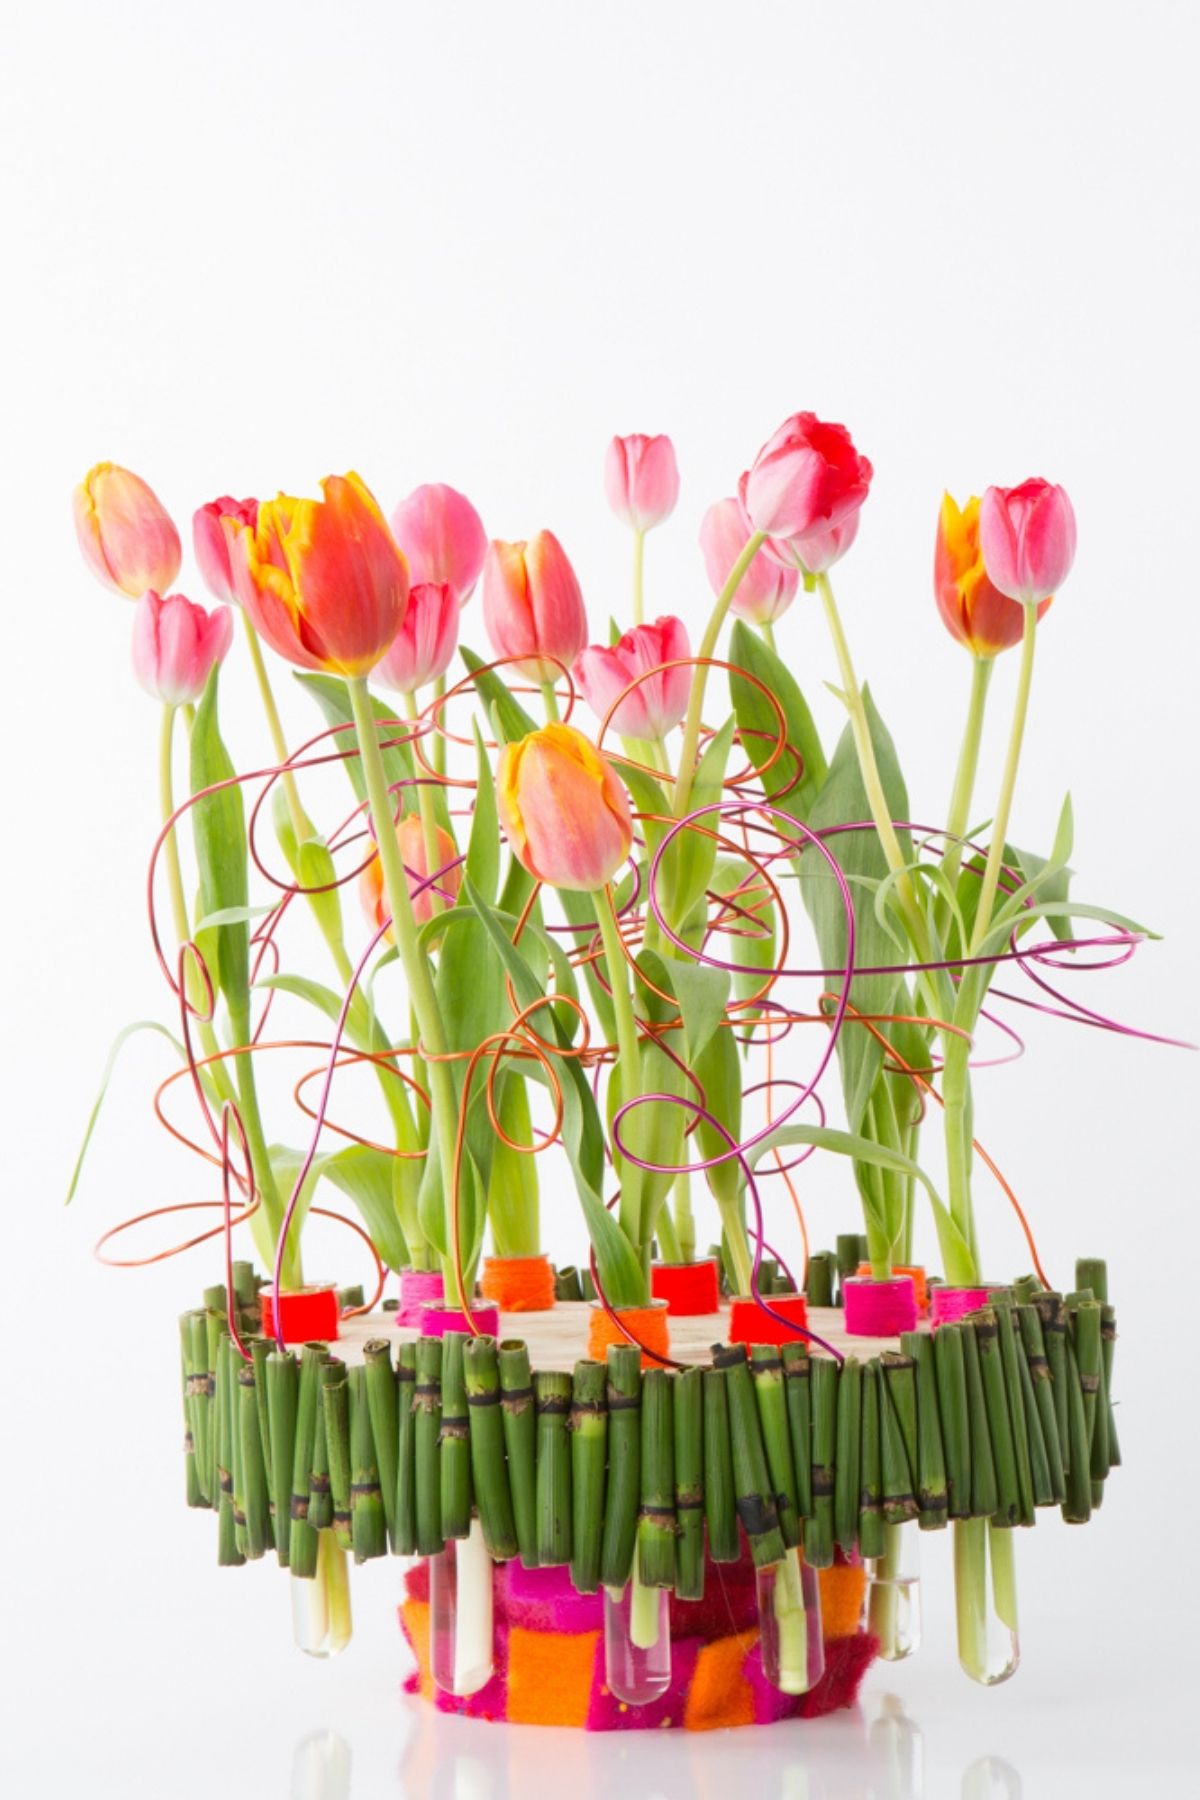 Tulip Floral Design by Lily Beelen - on Thursd